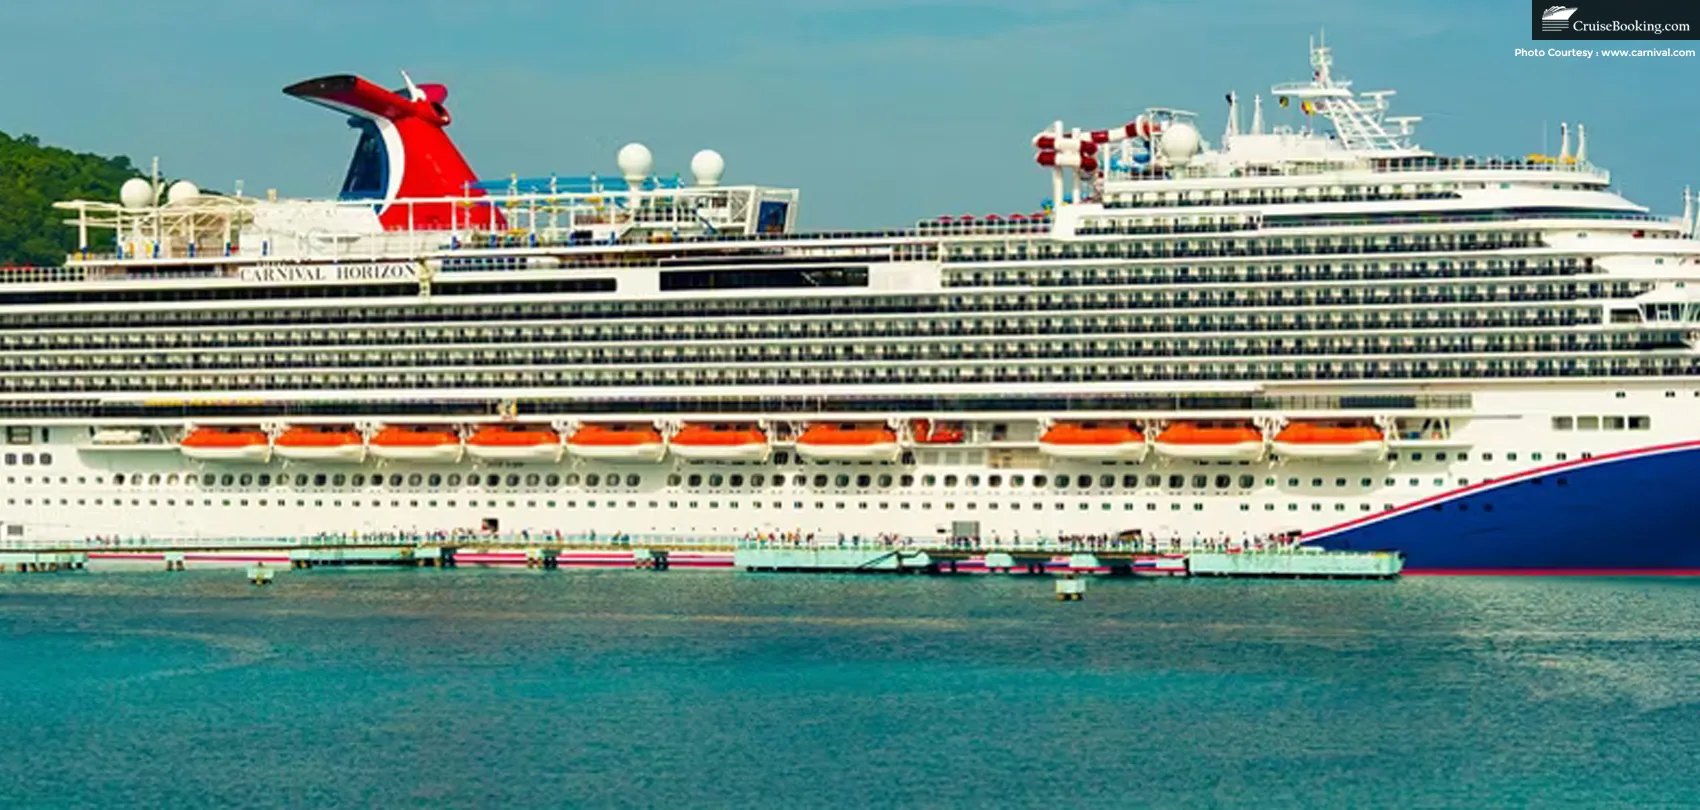 The Carnival Horizon completes five years of service